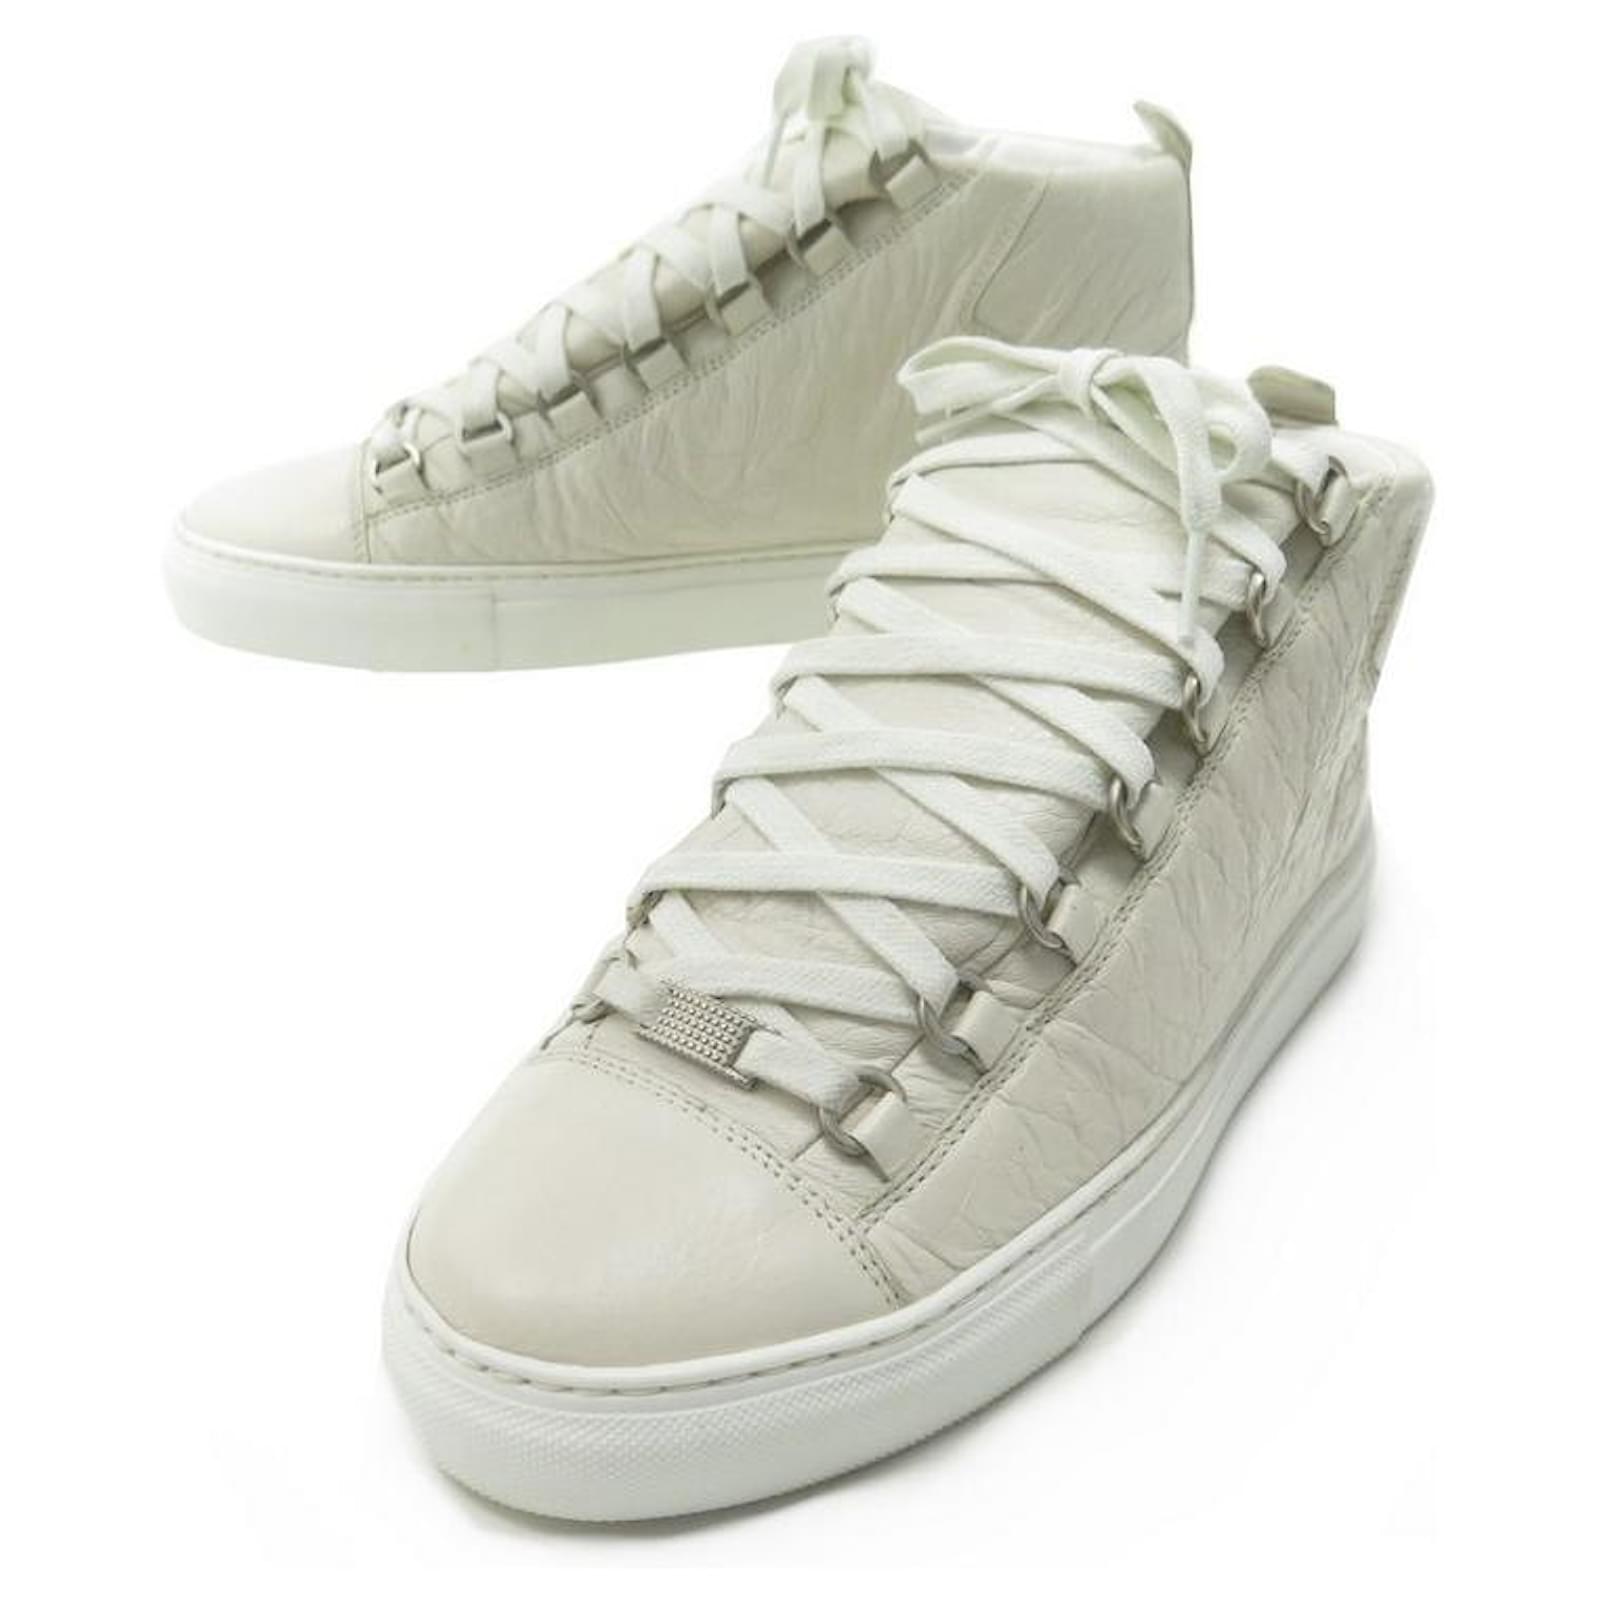 NEW BALENCIAGA BASKETS ARENA SHOES 458686 40 IT FR LEATHER SNEAKERS White ref.513769 - Closet